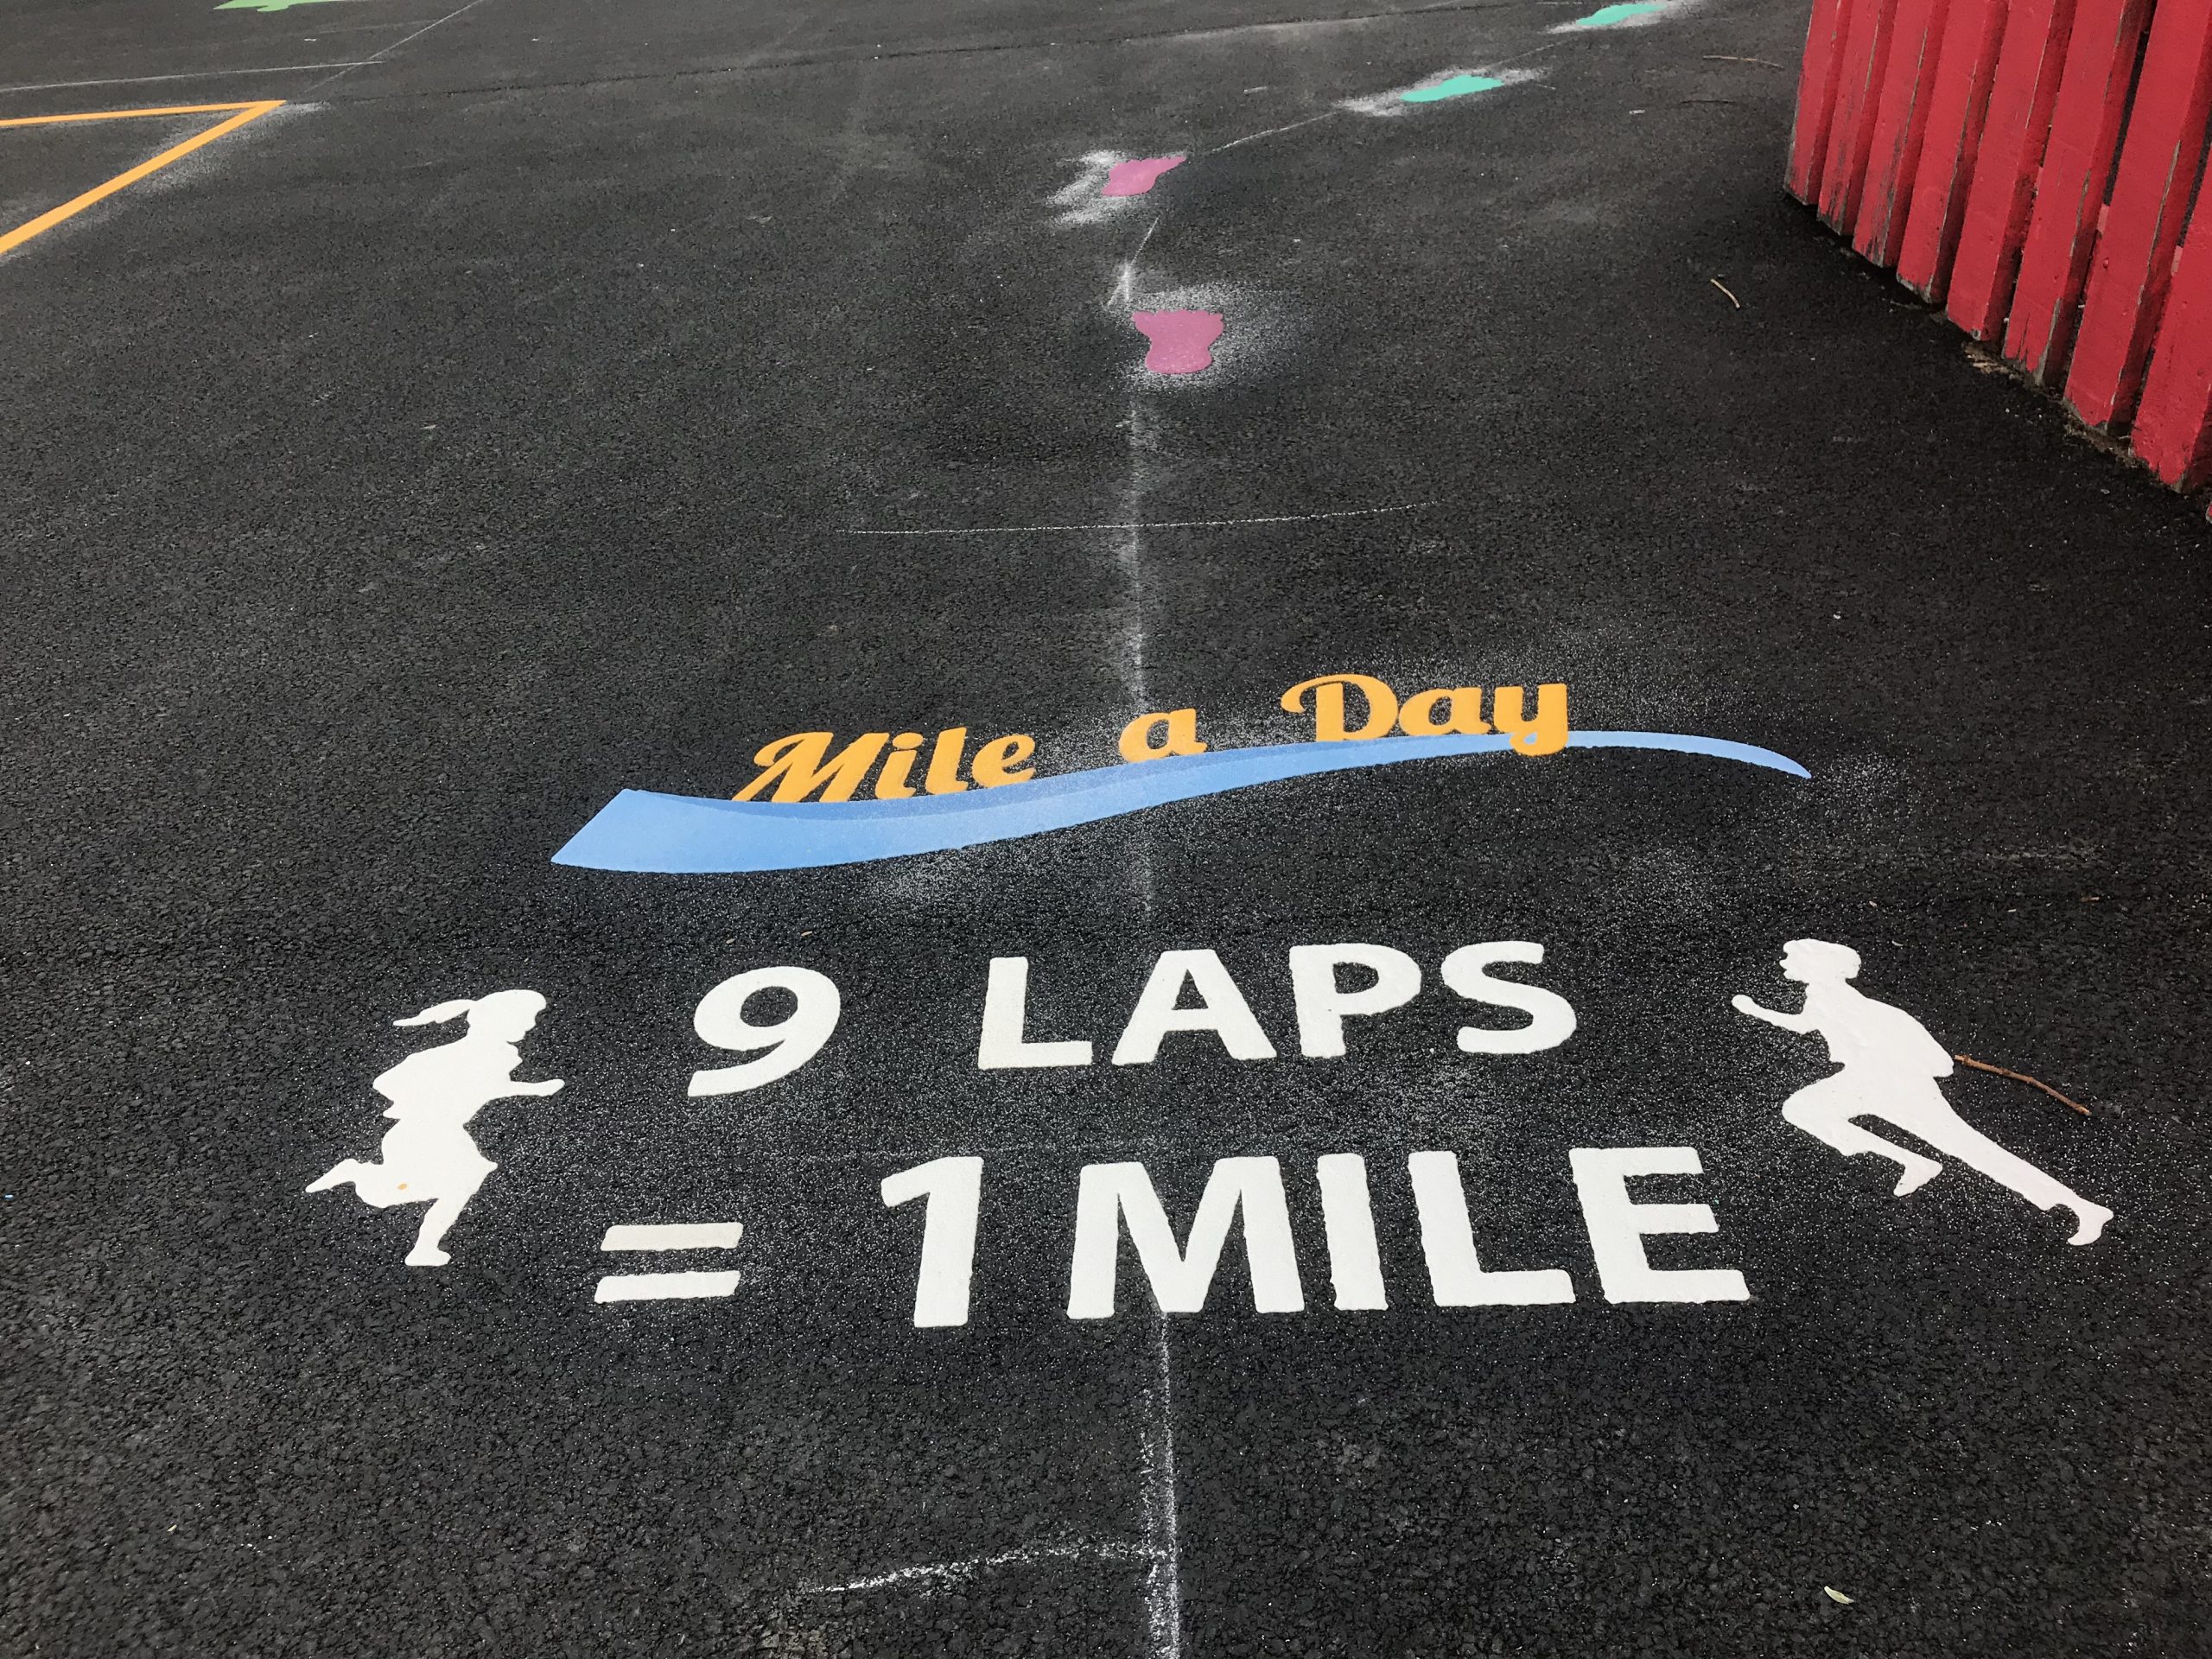 Learn more about the Daily Mile initiative